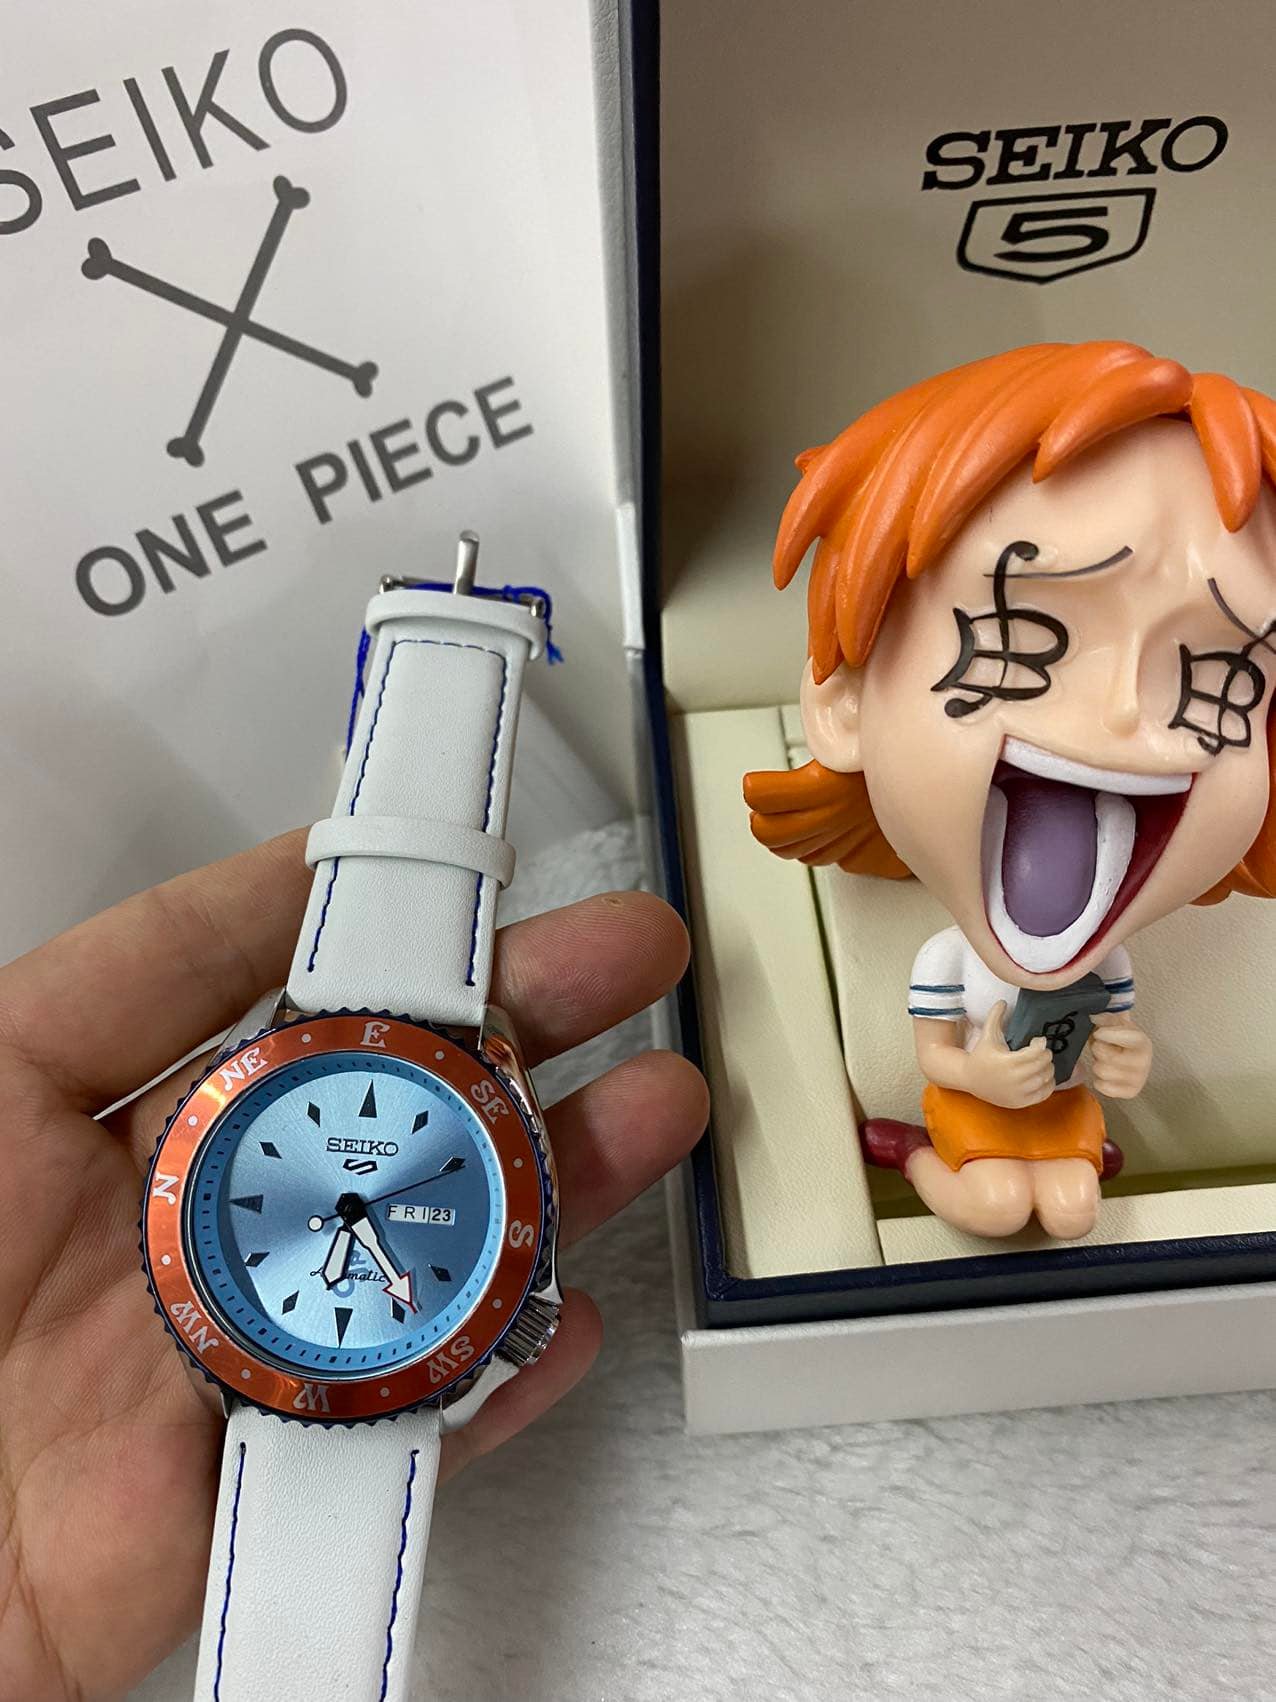 How Long Does It Take To Watch 'One Piece'? Answered | The Mary Sue